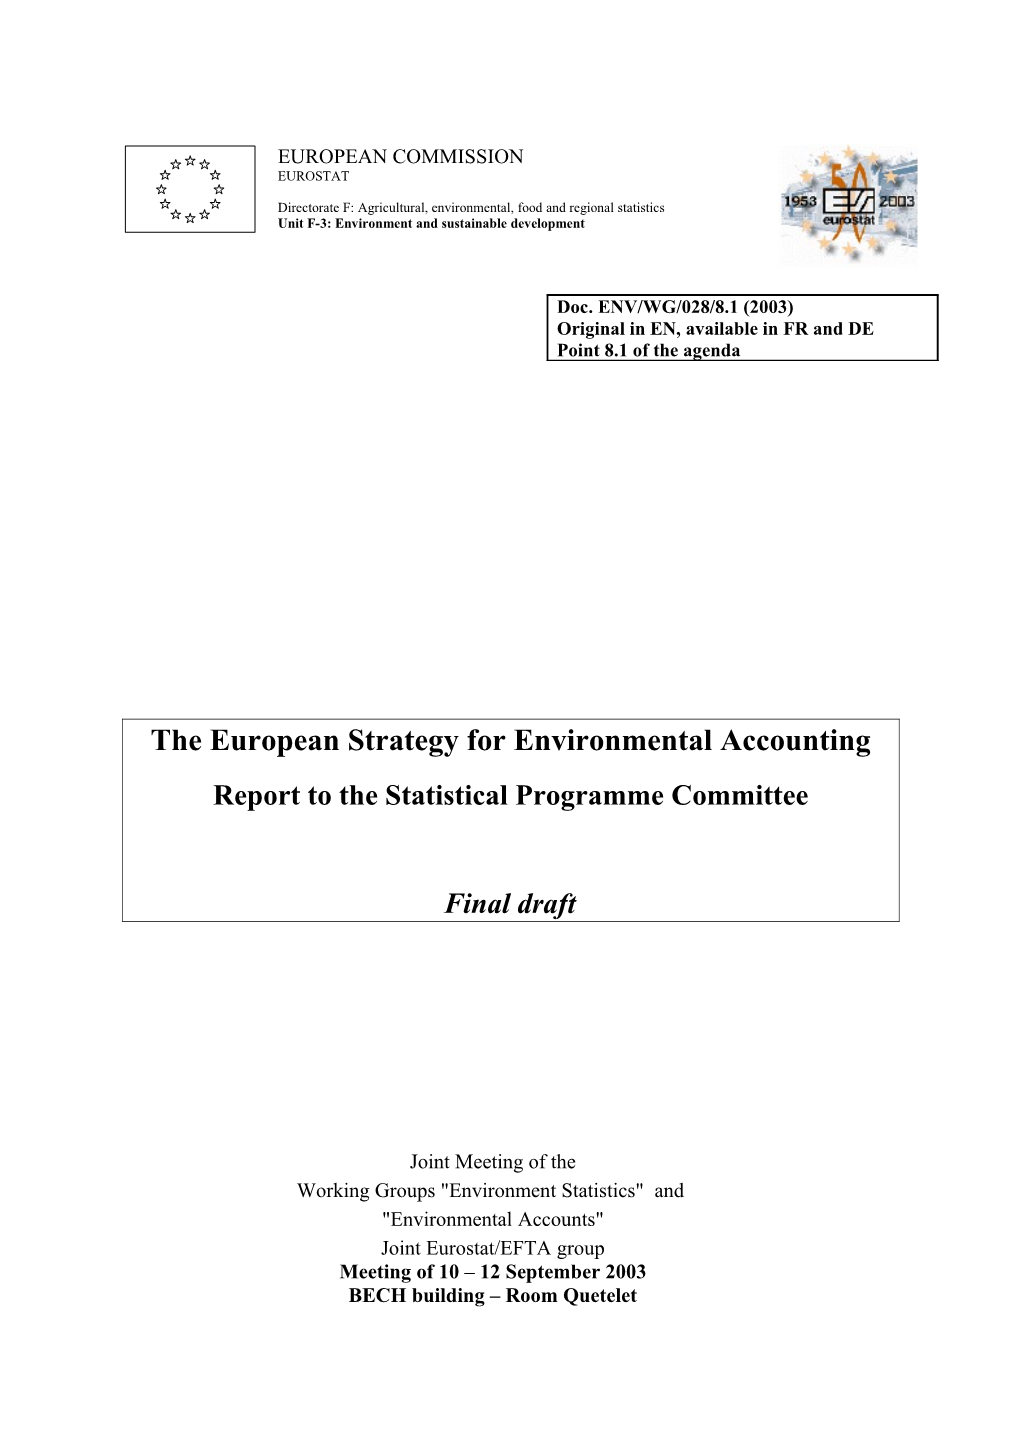 The European Strategy for Environmental Accounting